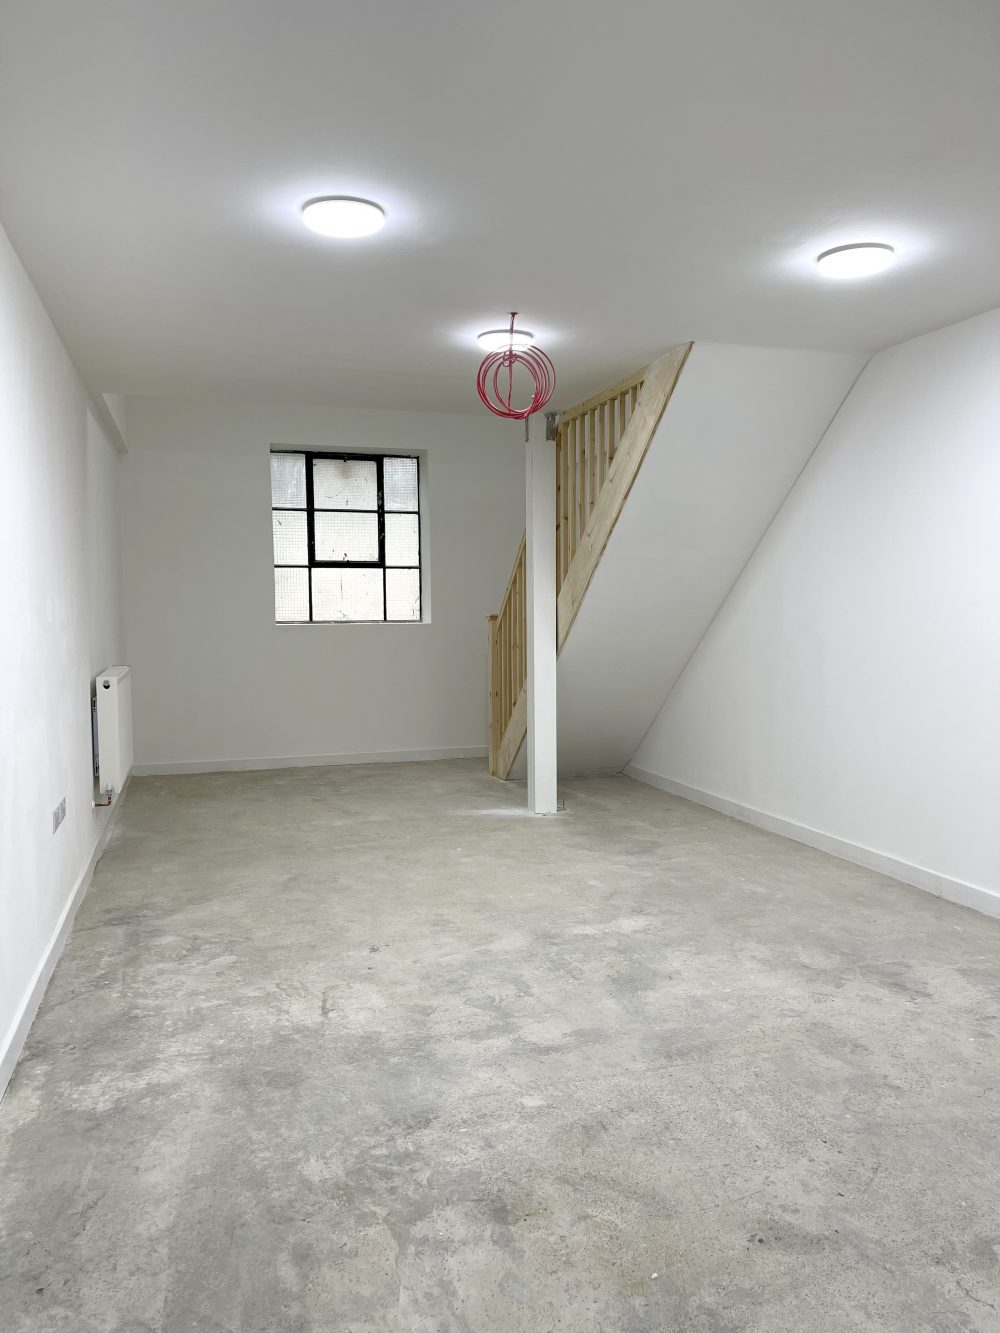 Creative live work style Studio flat Available to rent in EN3 Enfield Alxandra rd Pic6